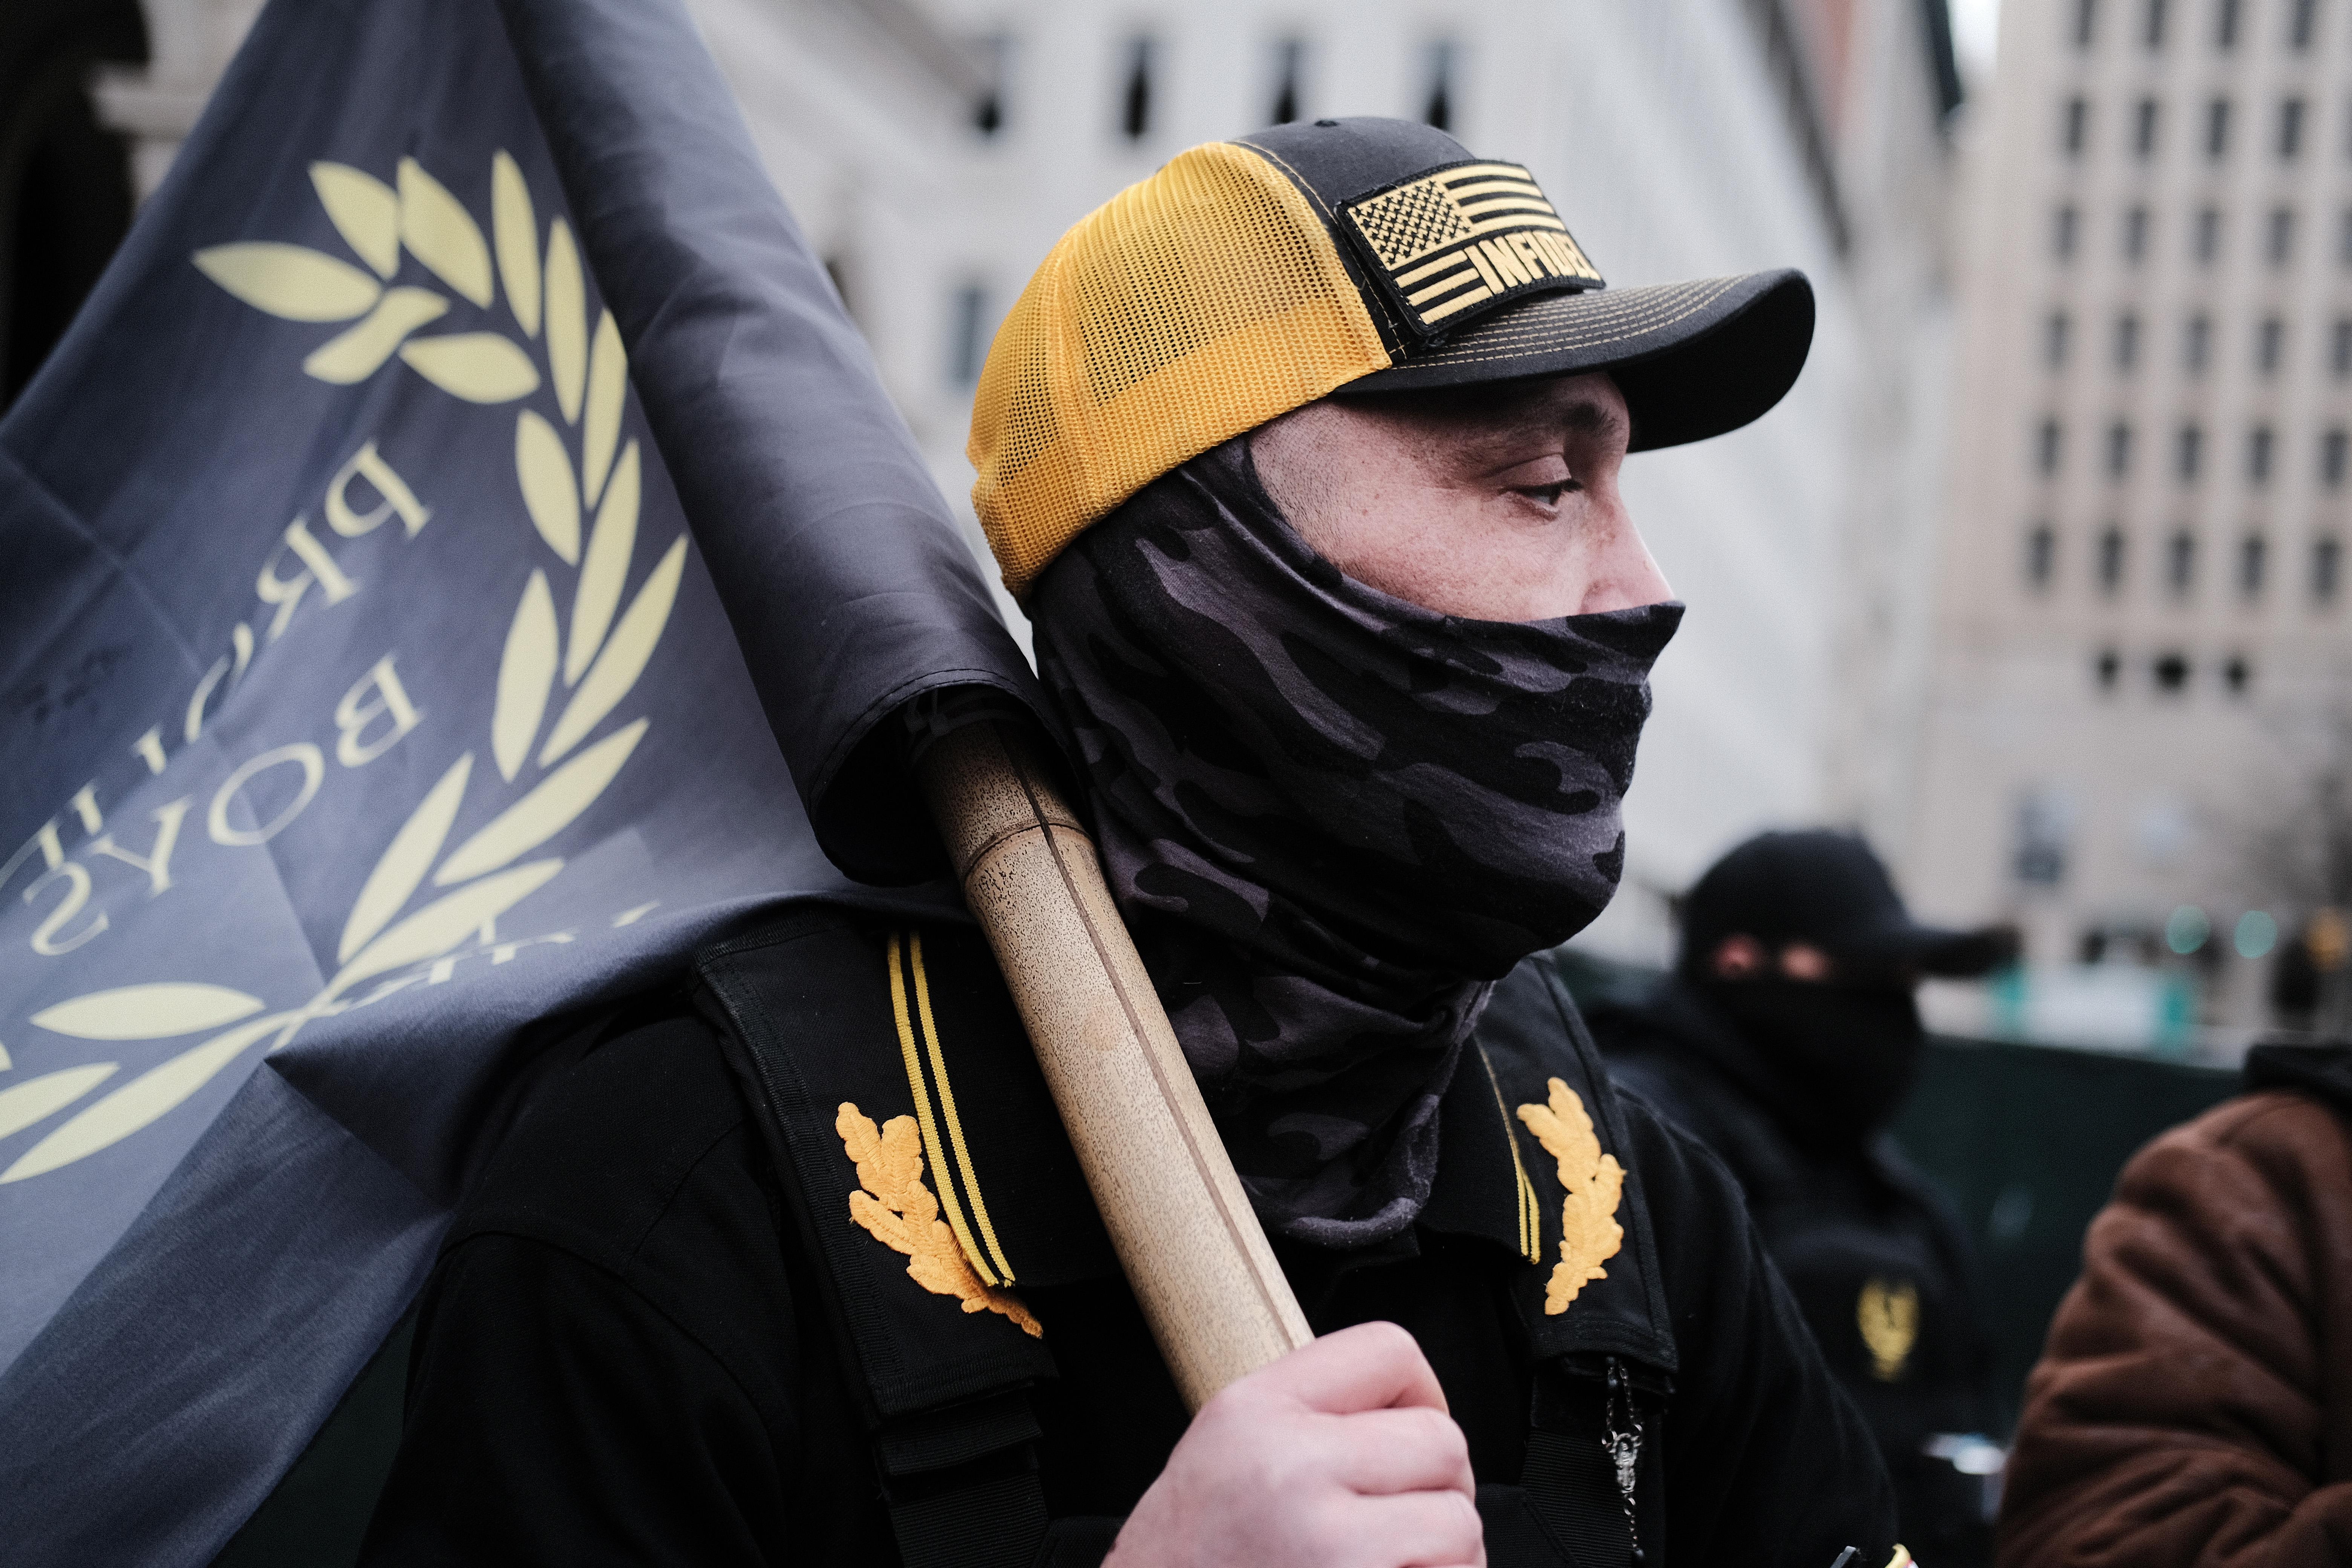 A man in black and yellow clothing carrying a Proud Boys flag. 